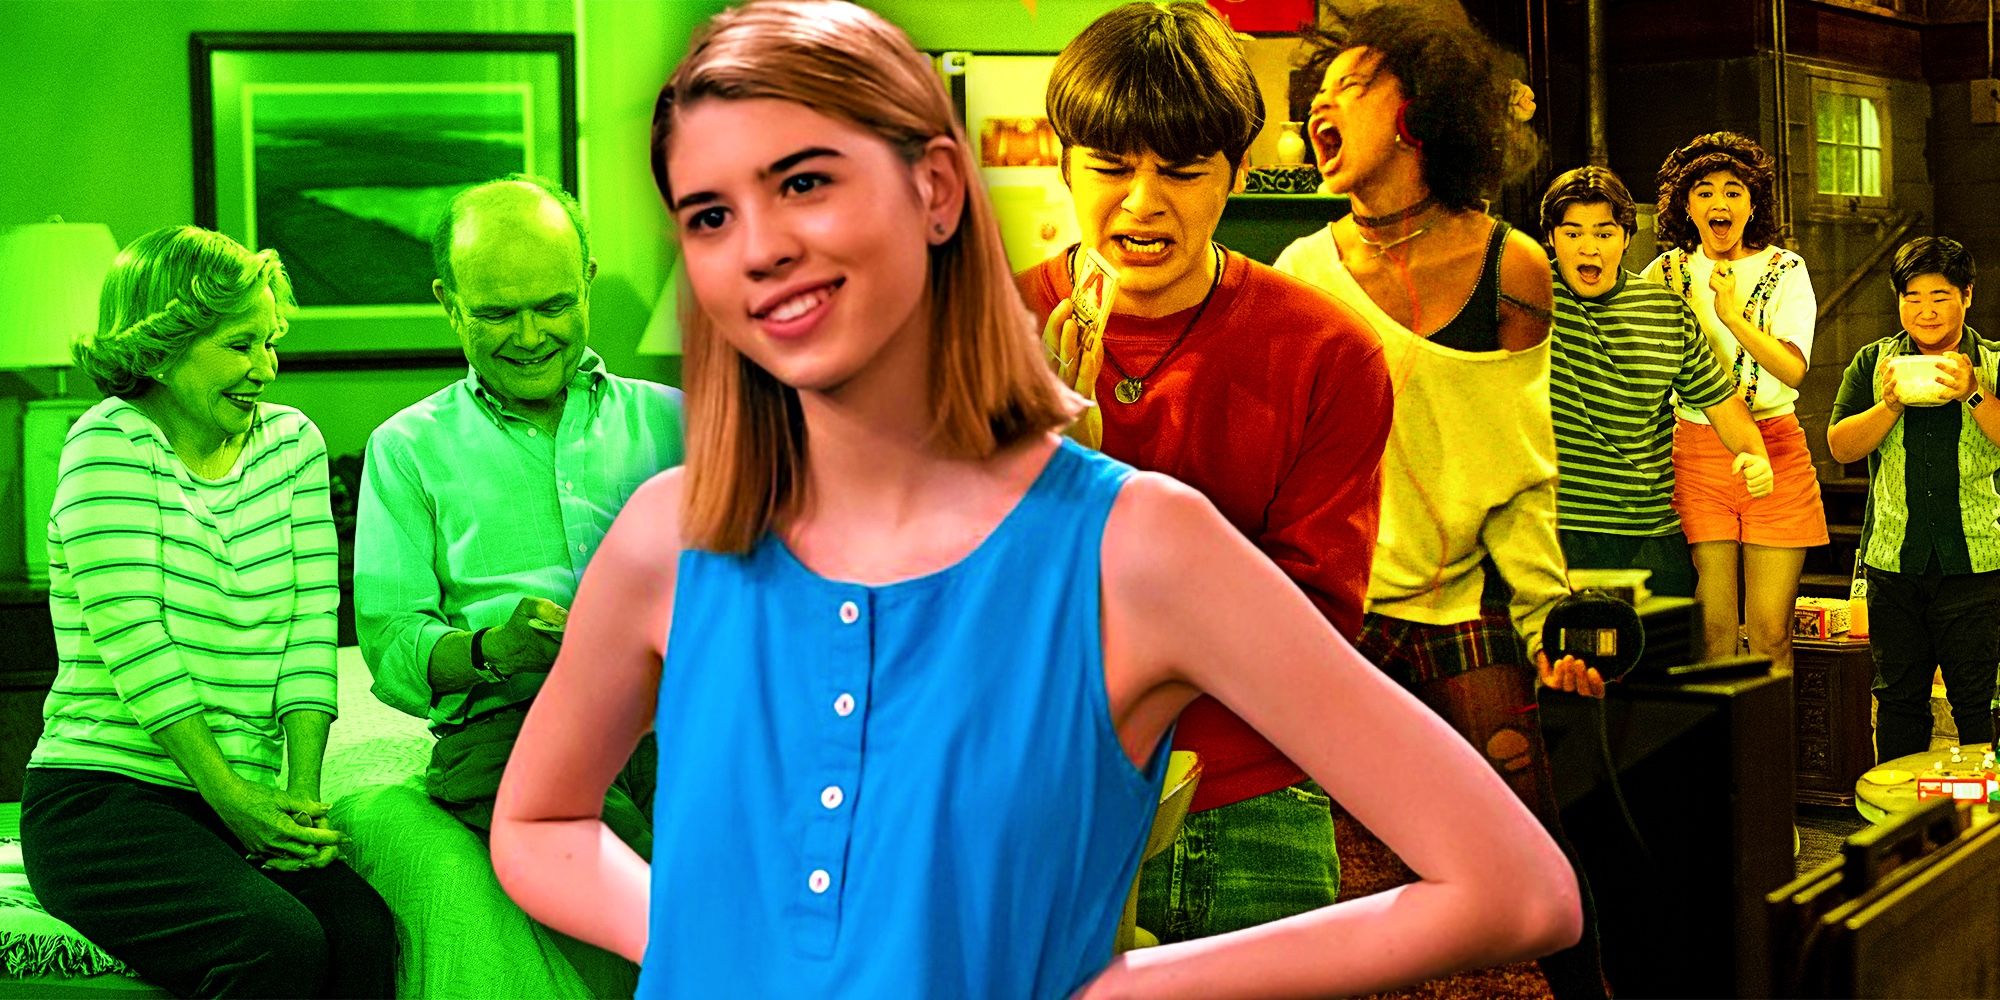 That ’90s Show Season 2’s Fez Tease Is Actually A Good Sign For The Show’s Future